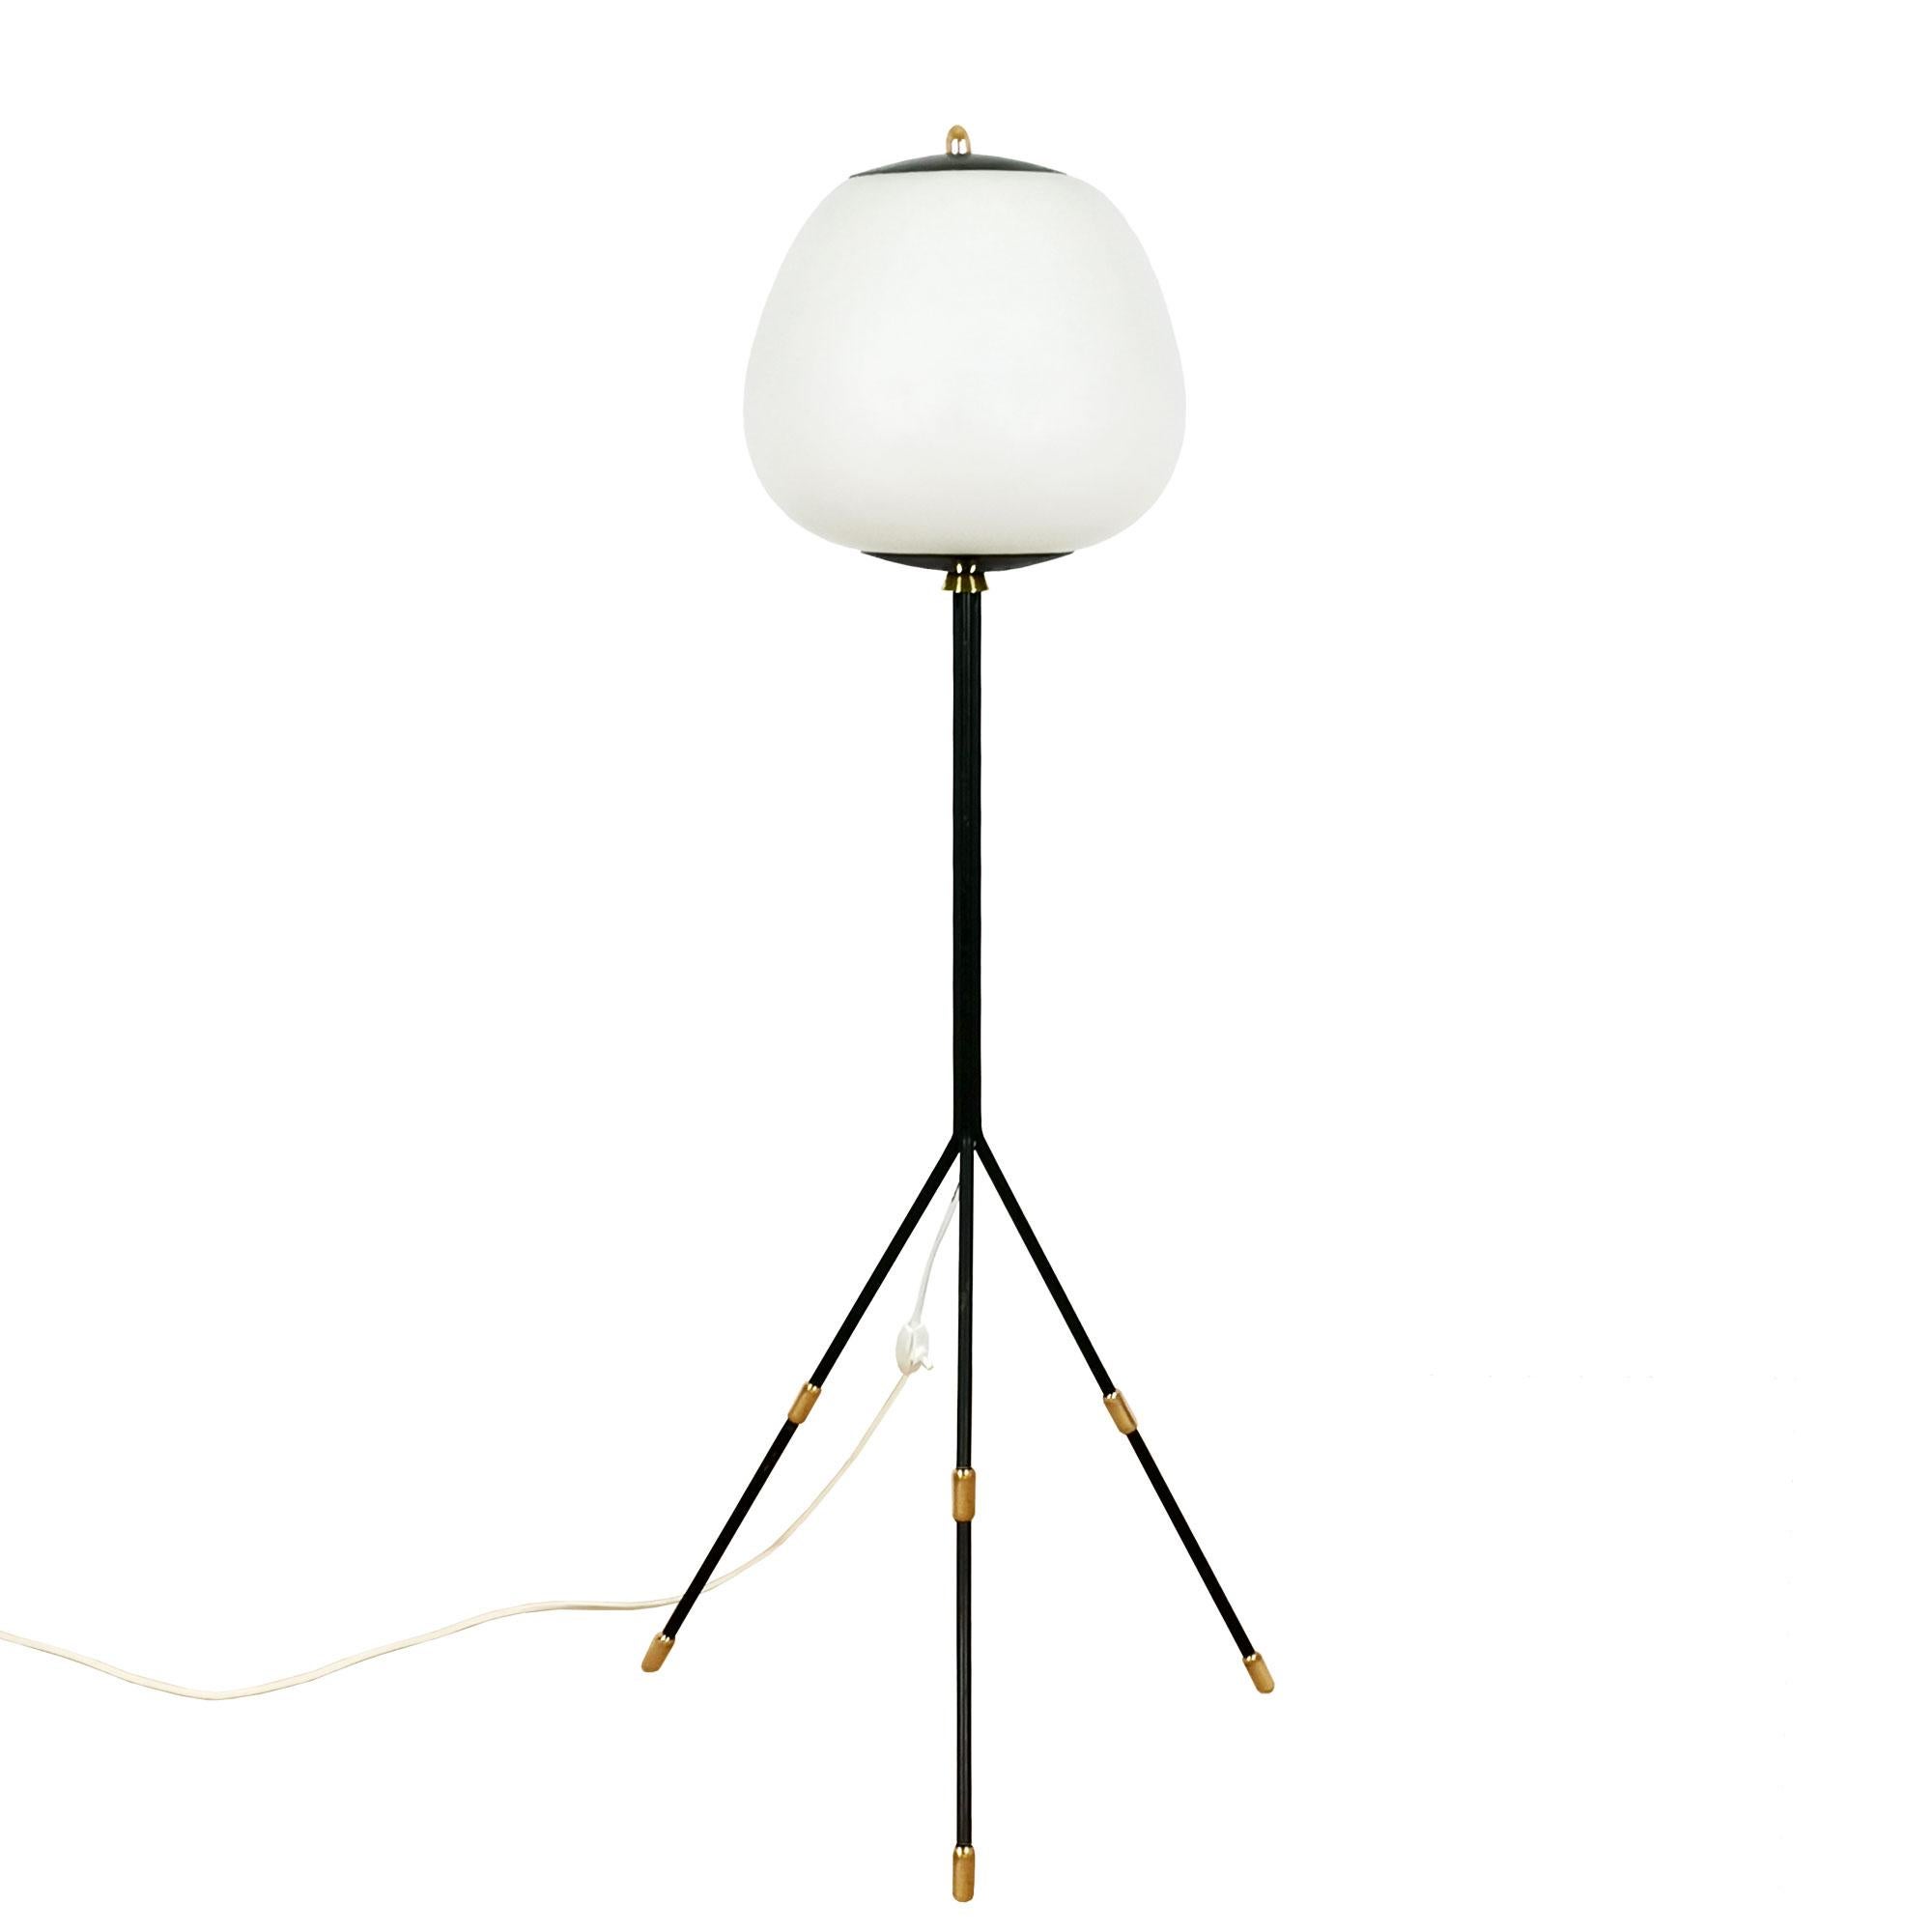 Tripod standing lamp, black lacquered steel with polished brass details, white opaline glass ball.
Italy c. 1950

Ball: diameter 30 x 32 cm.